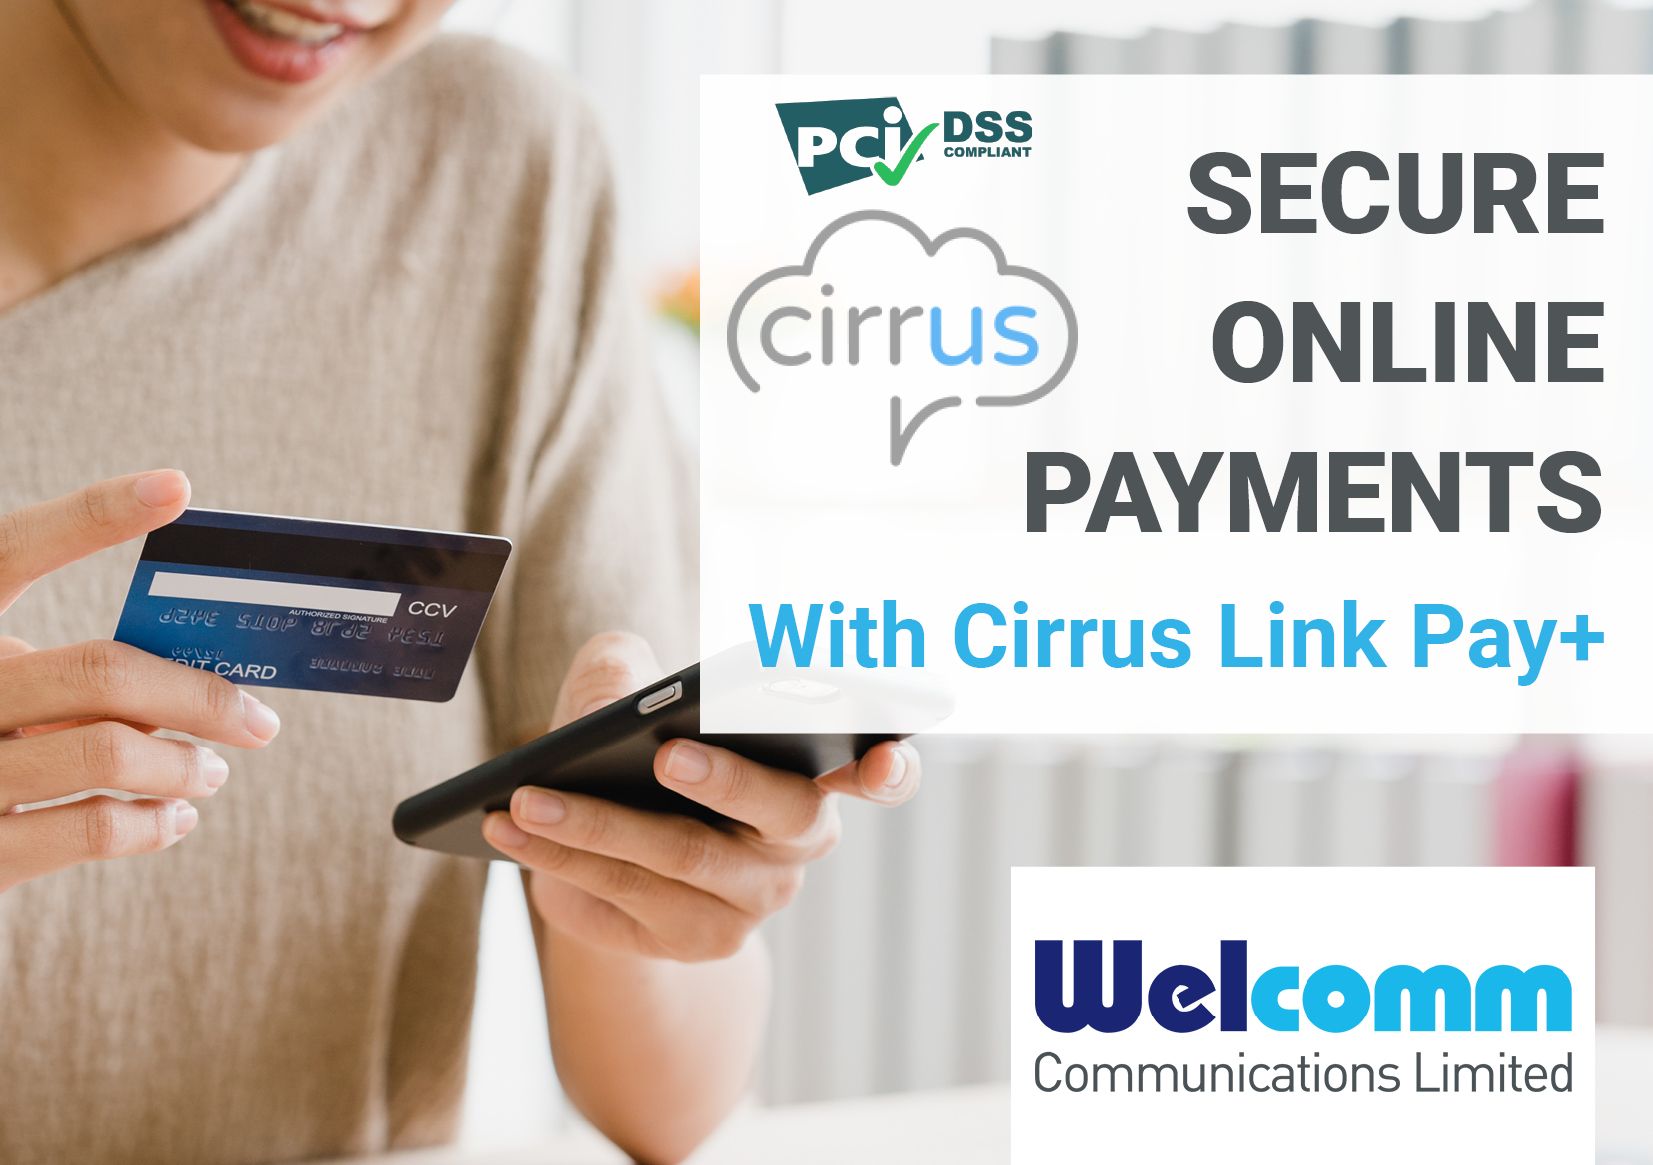 Secure Online Payments with Cirrus Link Pay+